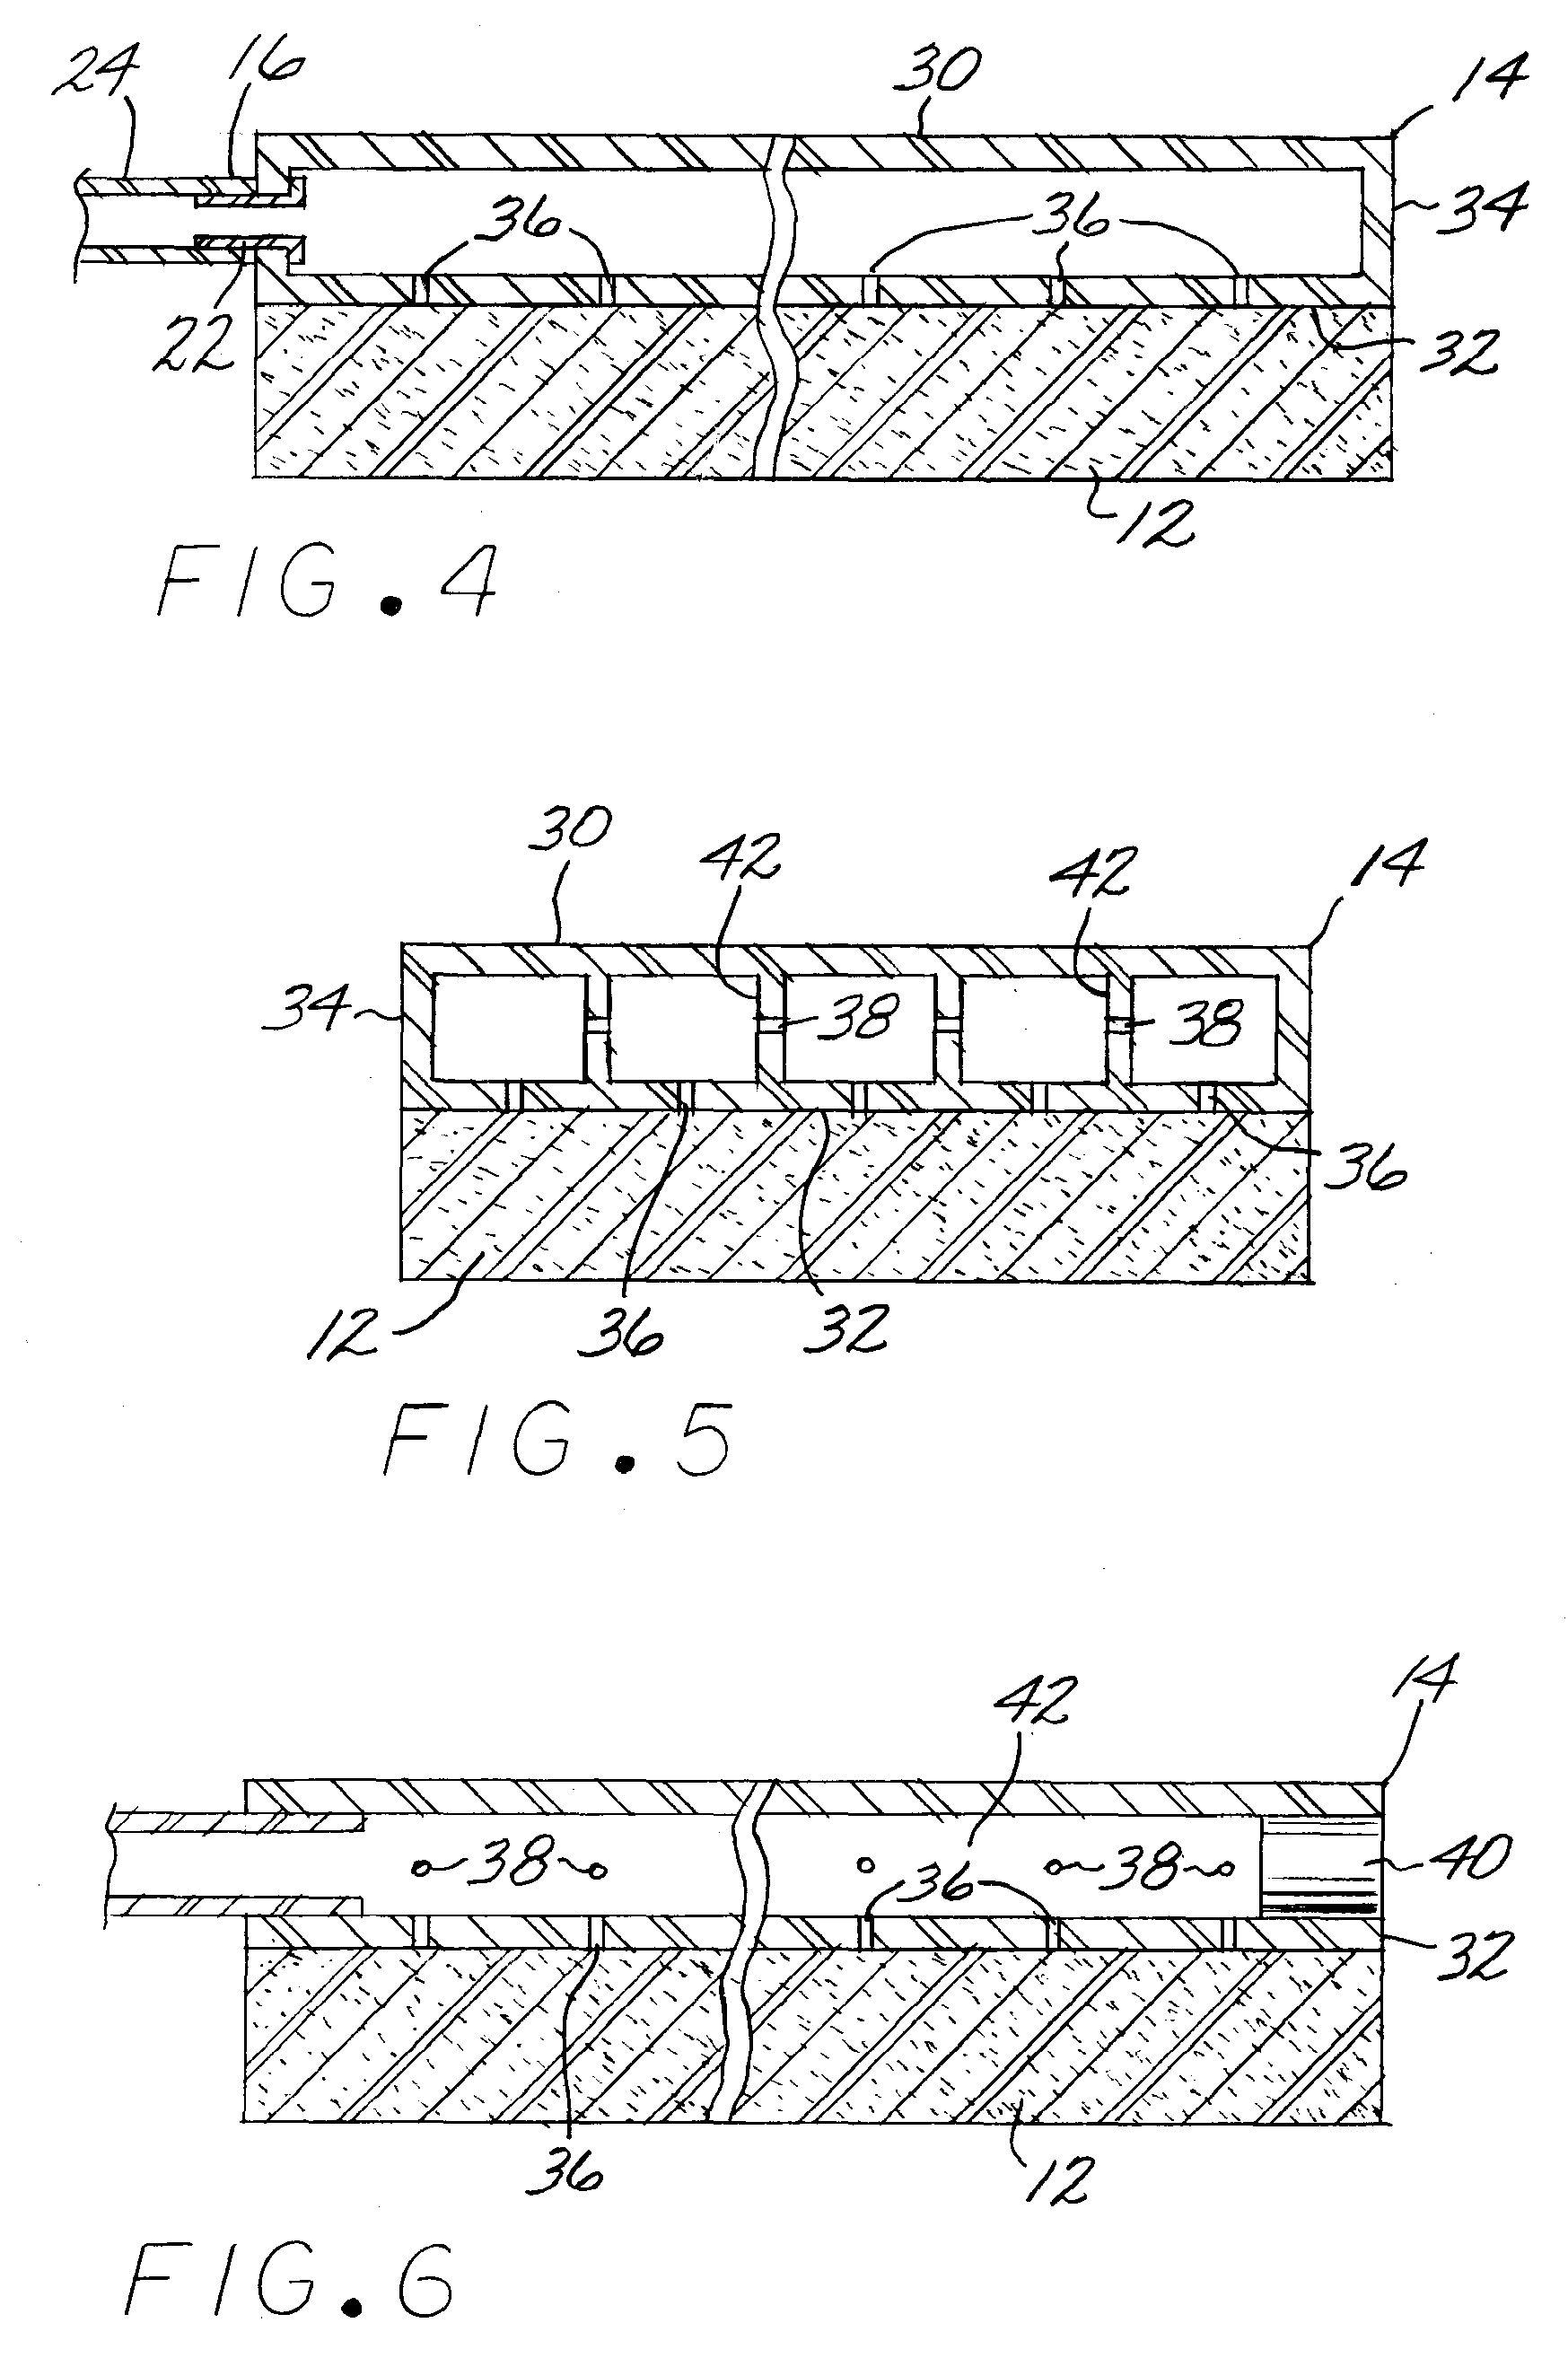 Liquid removal method and apparatus for surgical procedures